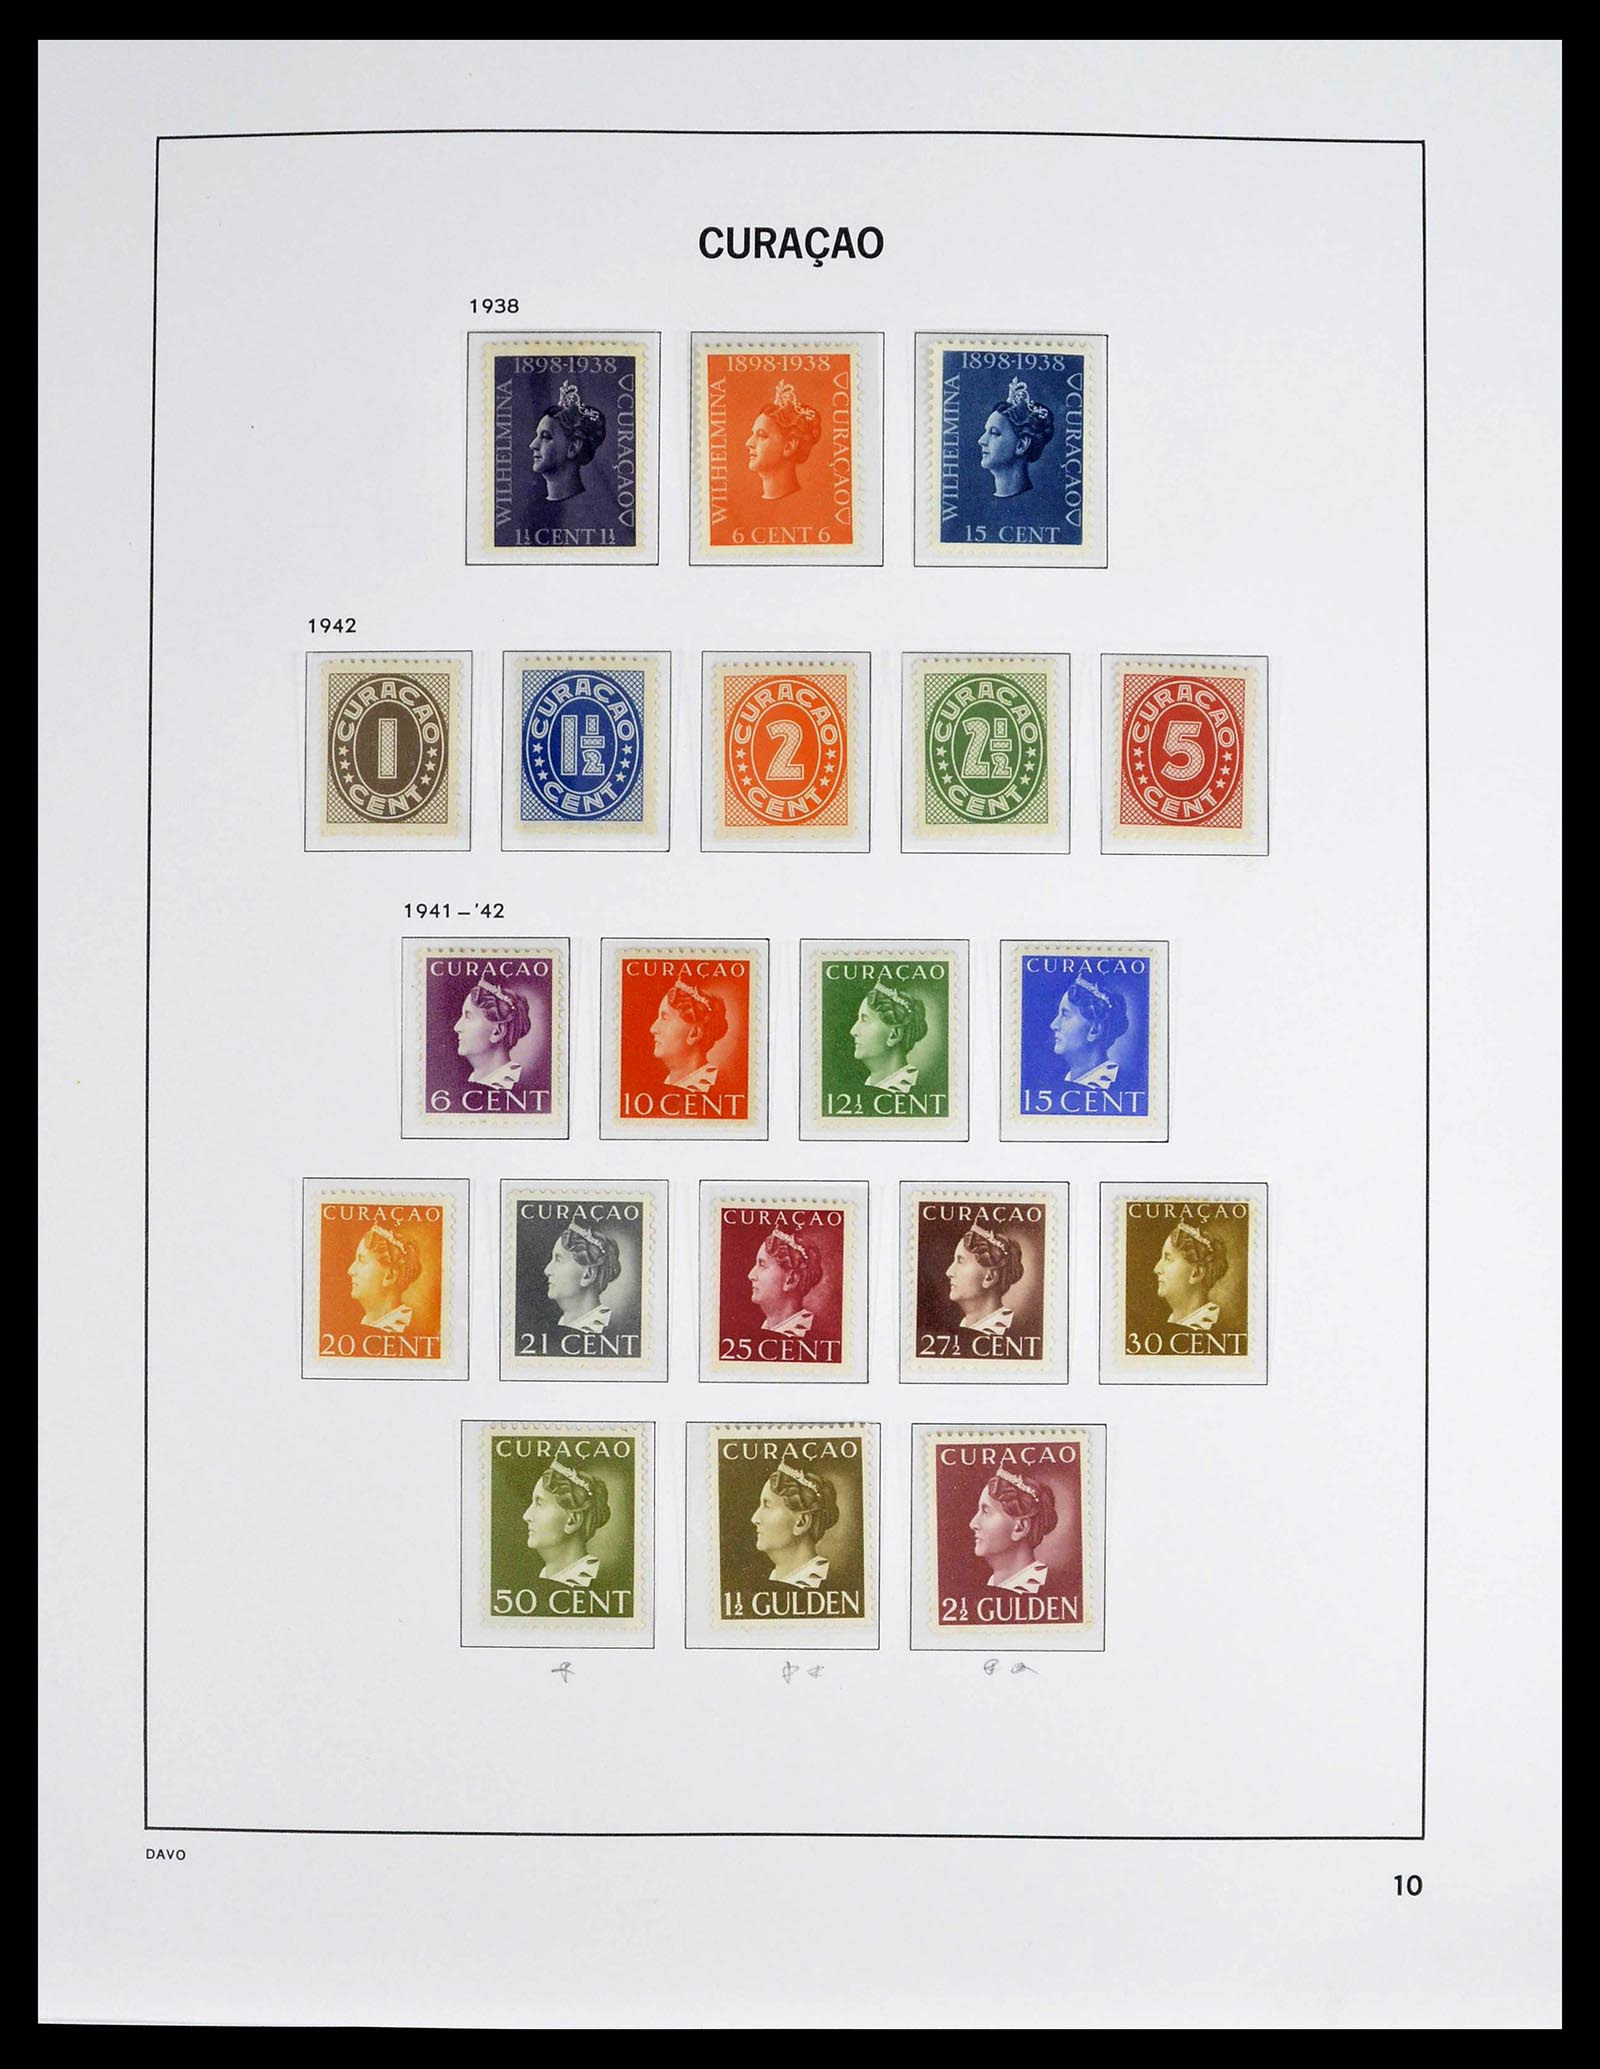 39360 0010 - Stamp collection 39360 Curaçao/Antilles complete 1873-2013.